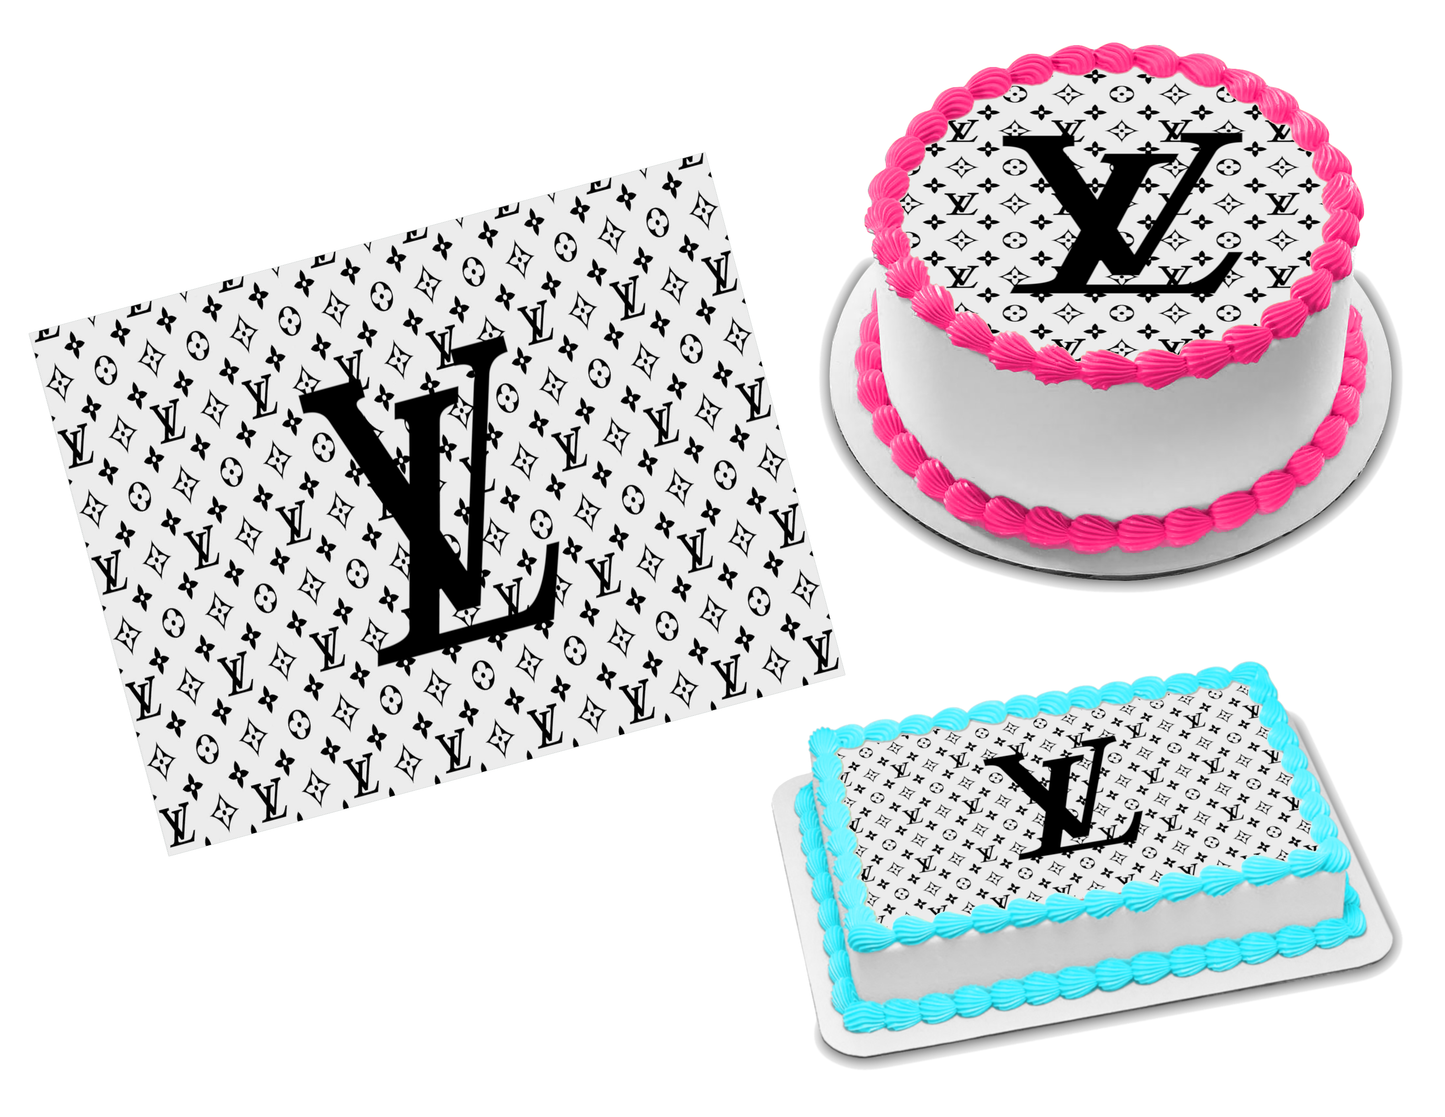 Print For Cakes - Louis Vuitton Inspired Edible Cake Wrap. Cake by